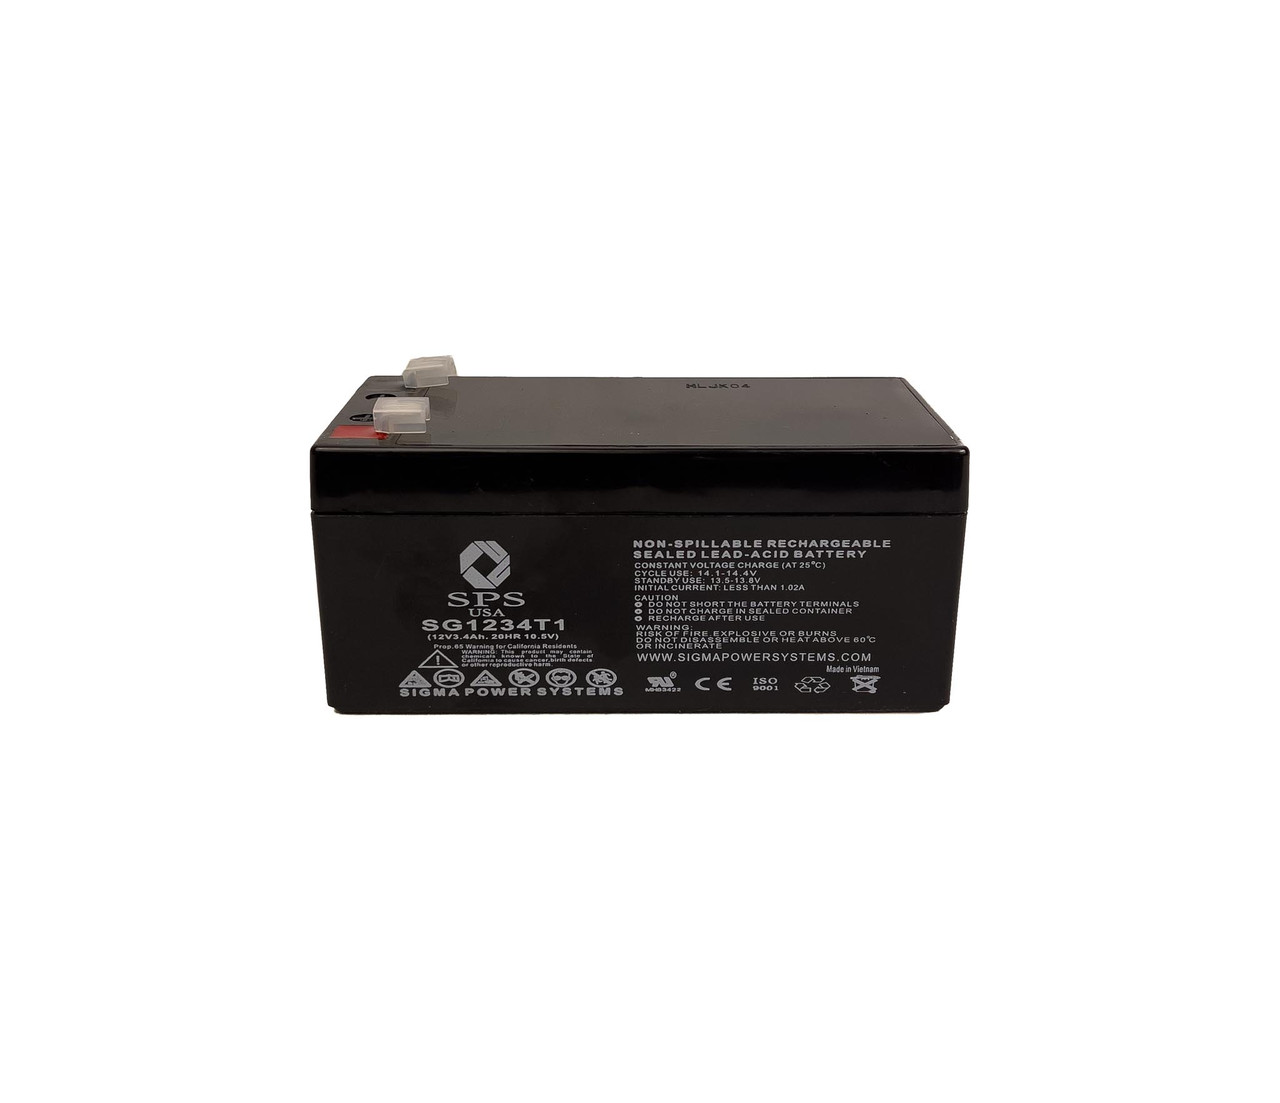 Raion Power RG1234T1 Rechargeable Compatible Replacement Battery for Wheel Horse 108-9358 Lawn Mower